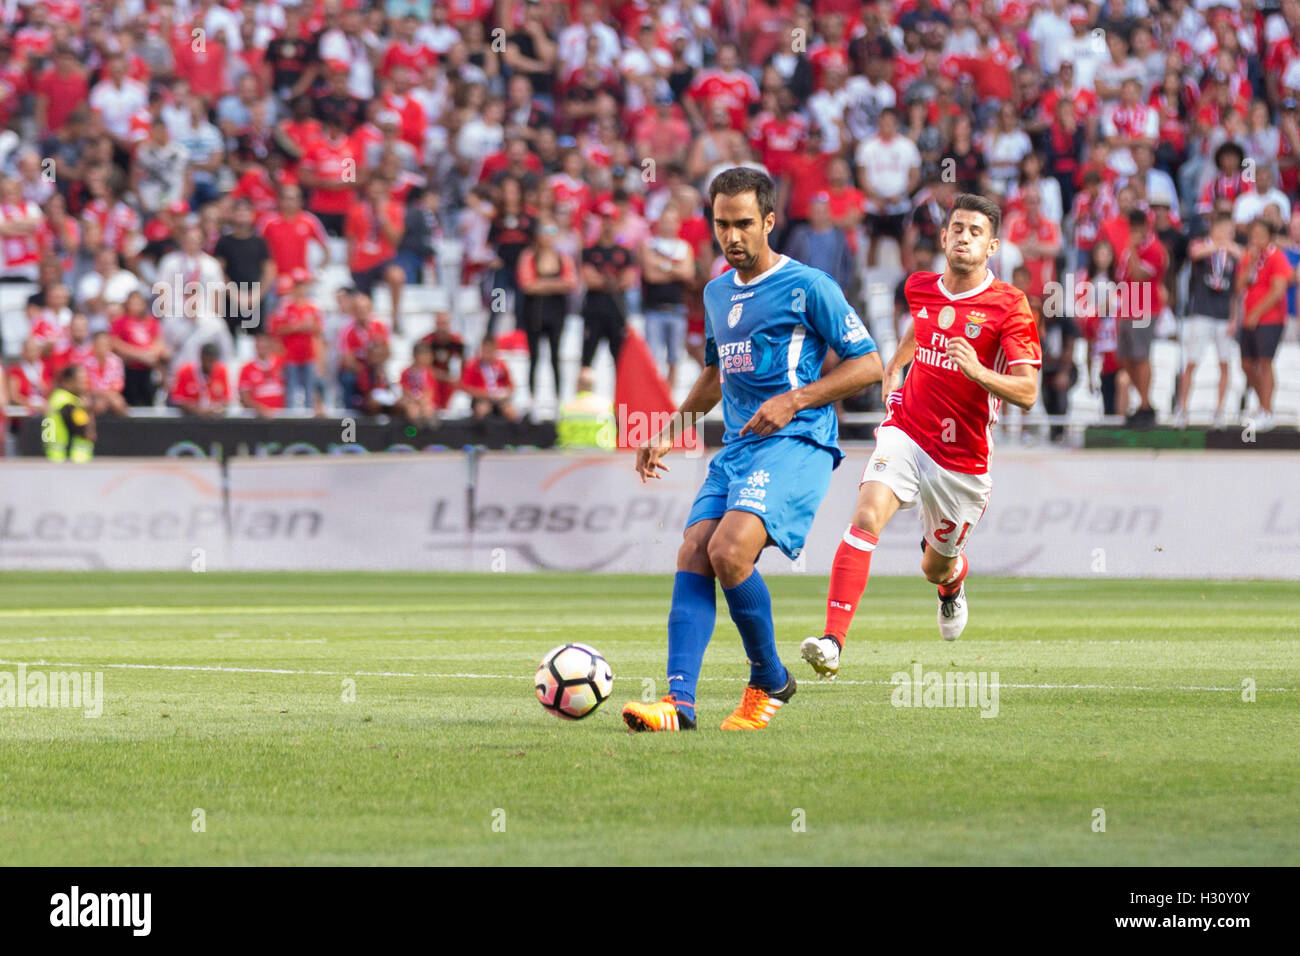 Lisbon, Portugal. 2 Oct, 2016. Feirense's Portuguese defender Paulo Monteiro (37) in action during the game SL Benfica vs GD Feirense Credit:  Alexandre de Sousa/Alamy Live News Stock Photo